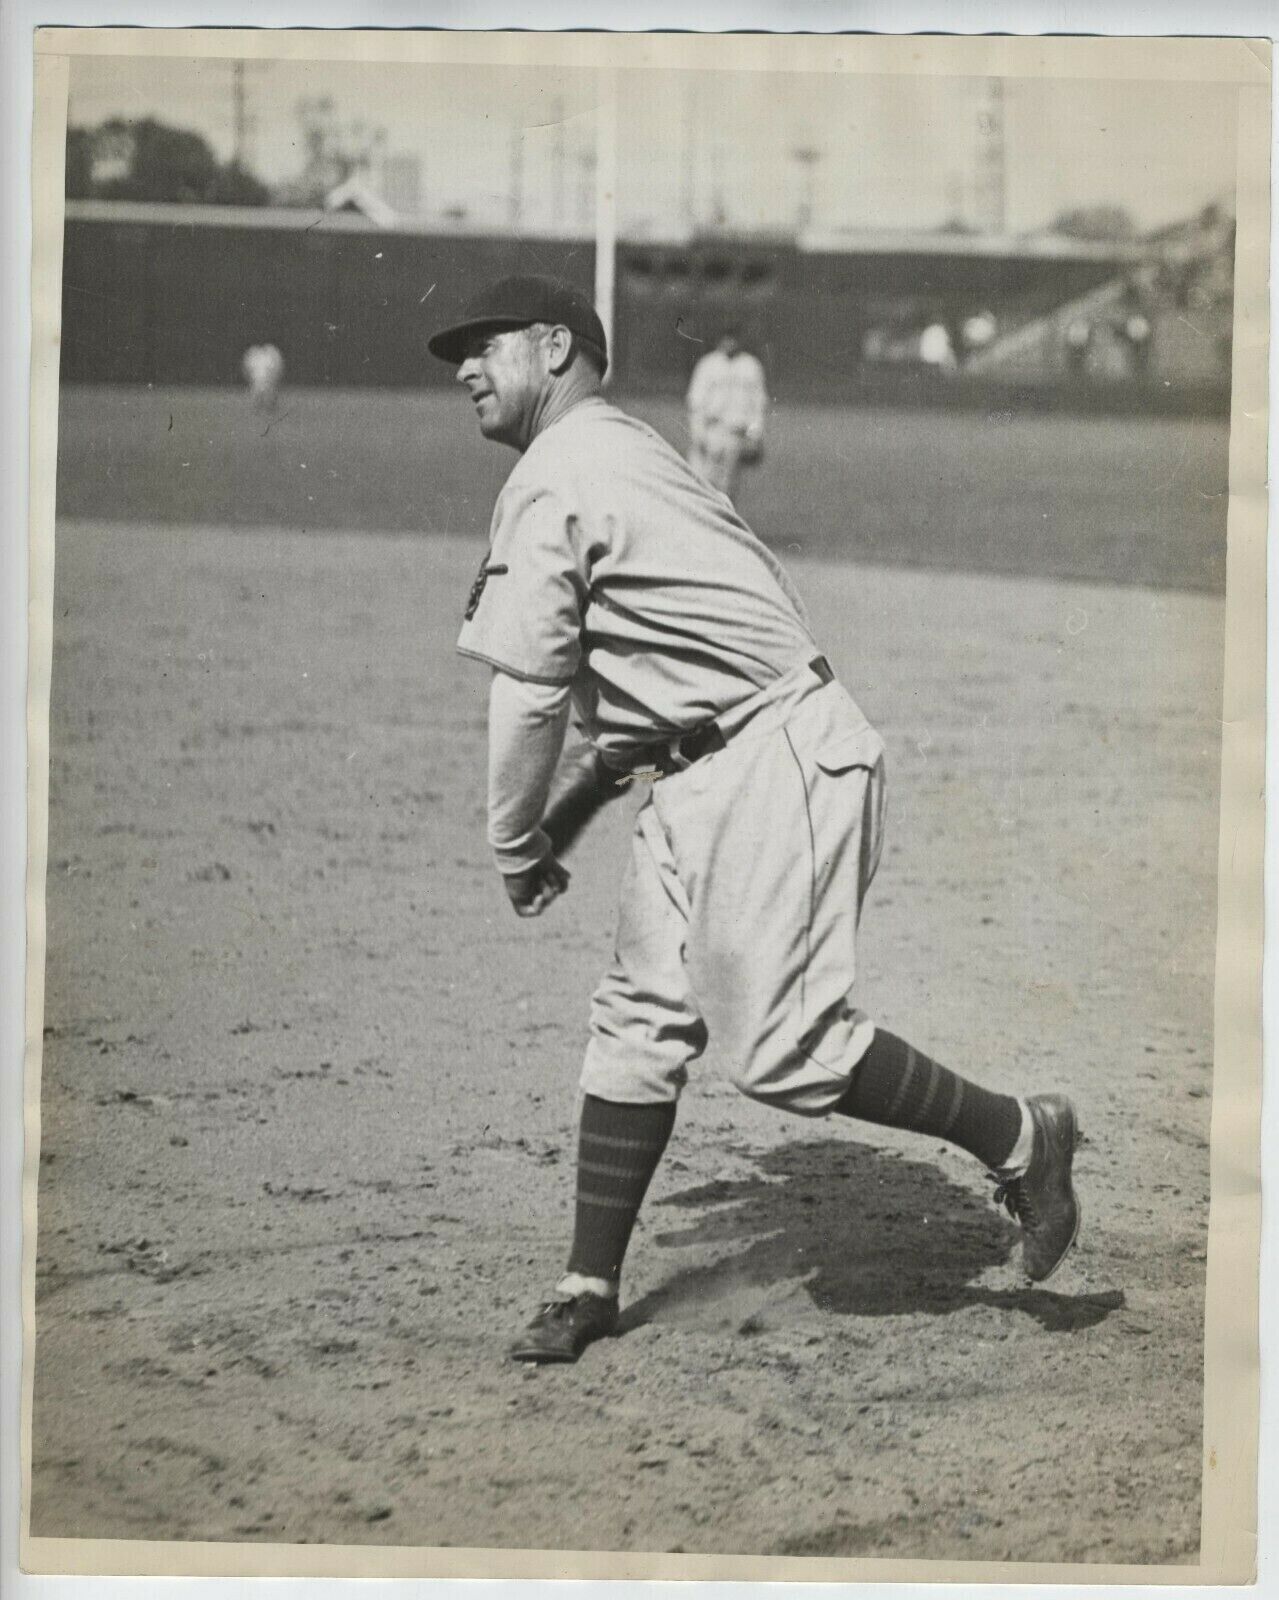 CHICAGO CUBS CHARLIE GRIMM THROWING BALL PHOTO VINTAGE 1930 ORIGINAL